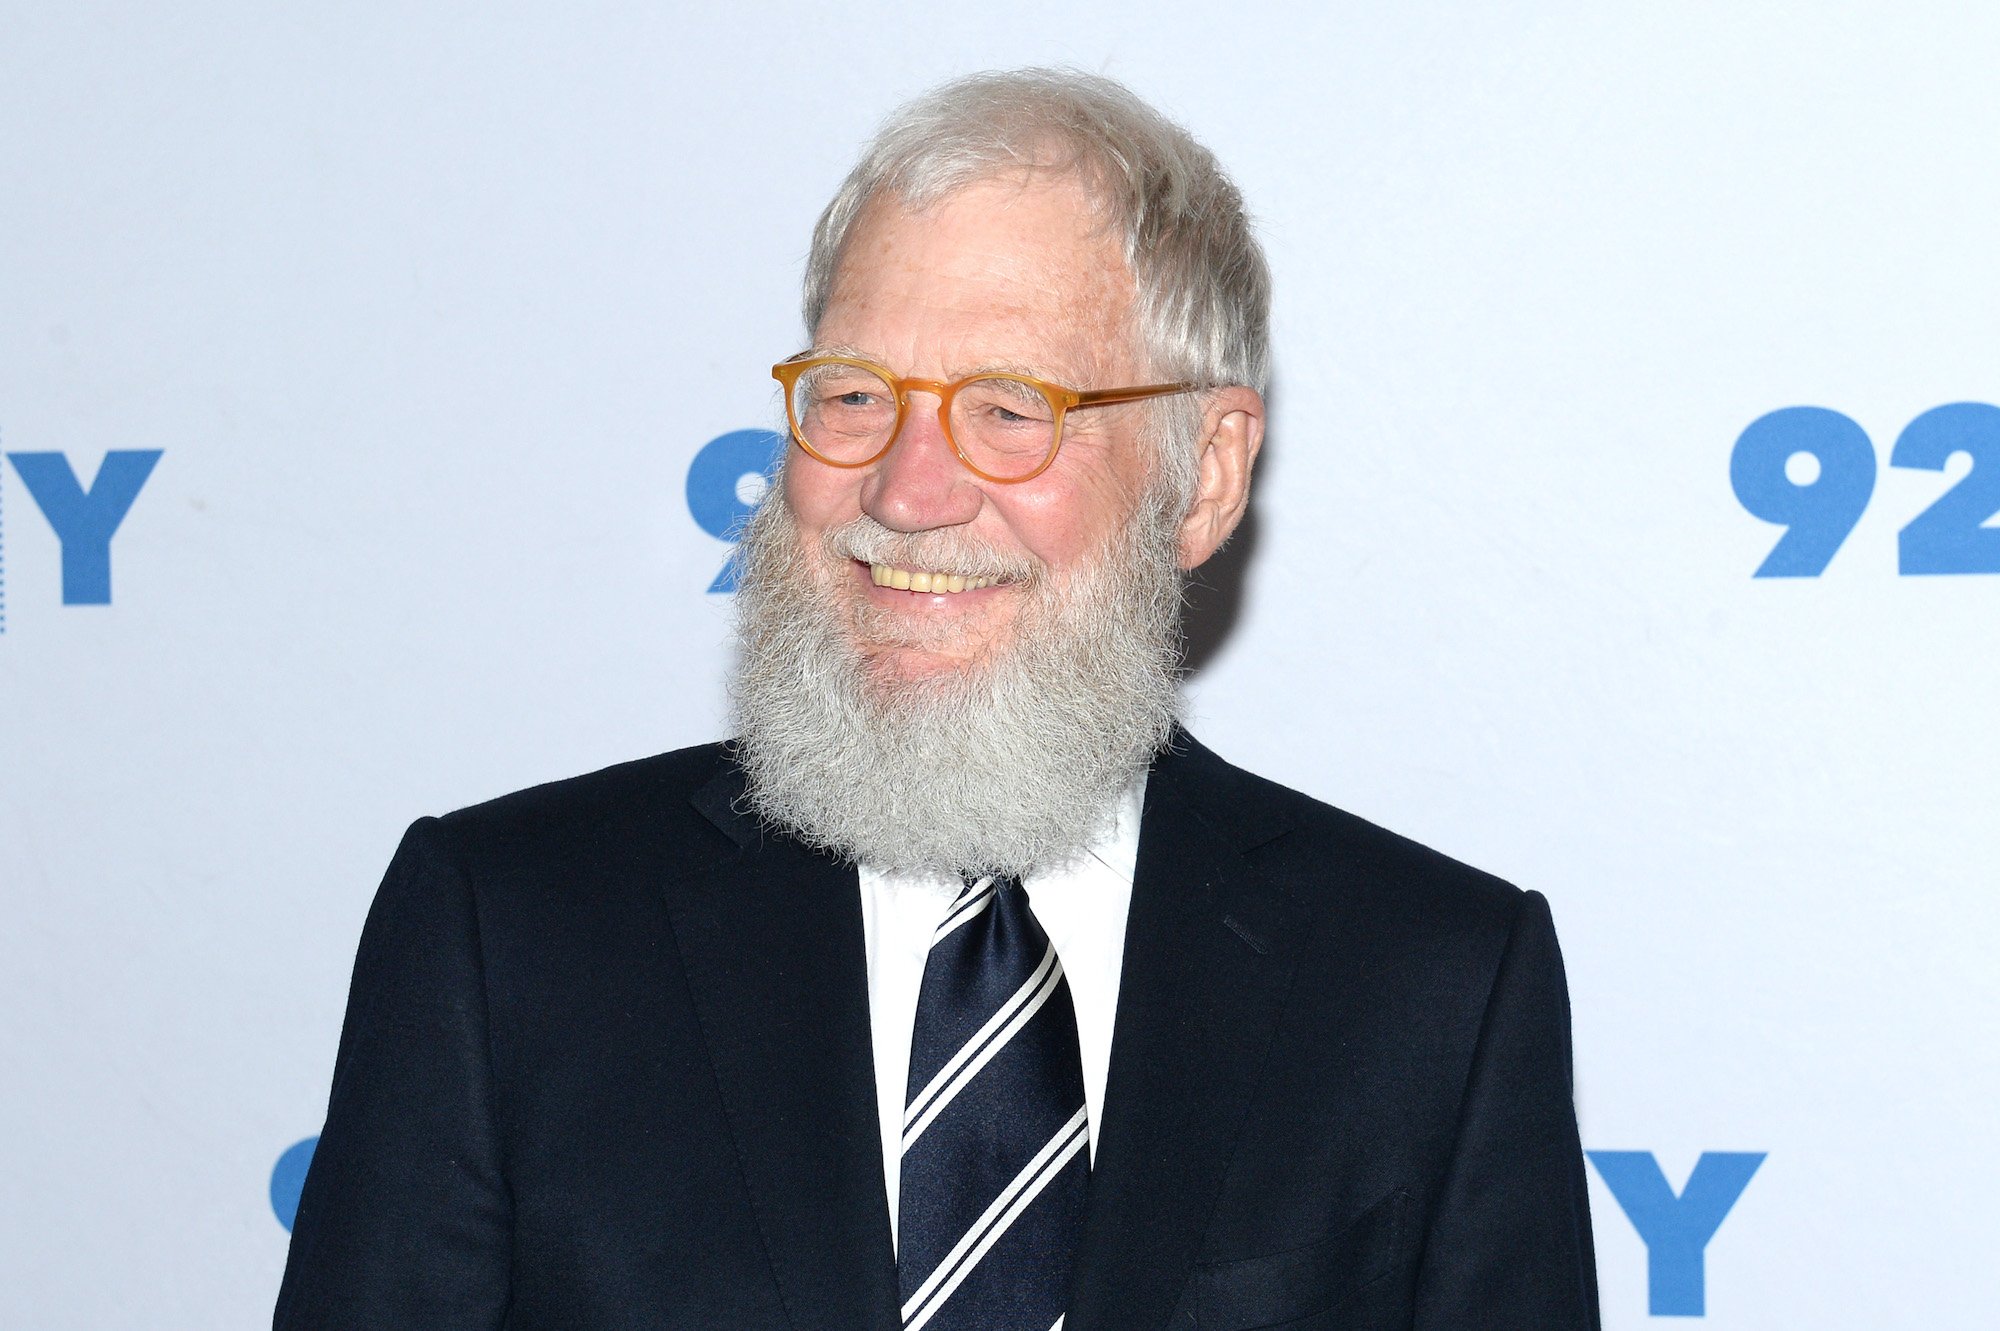 David Letterman smiling in front of a white background